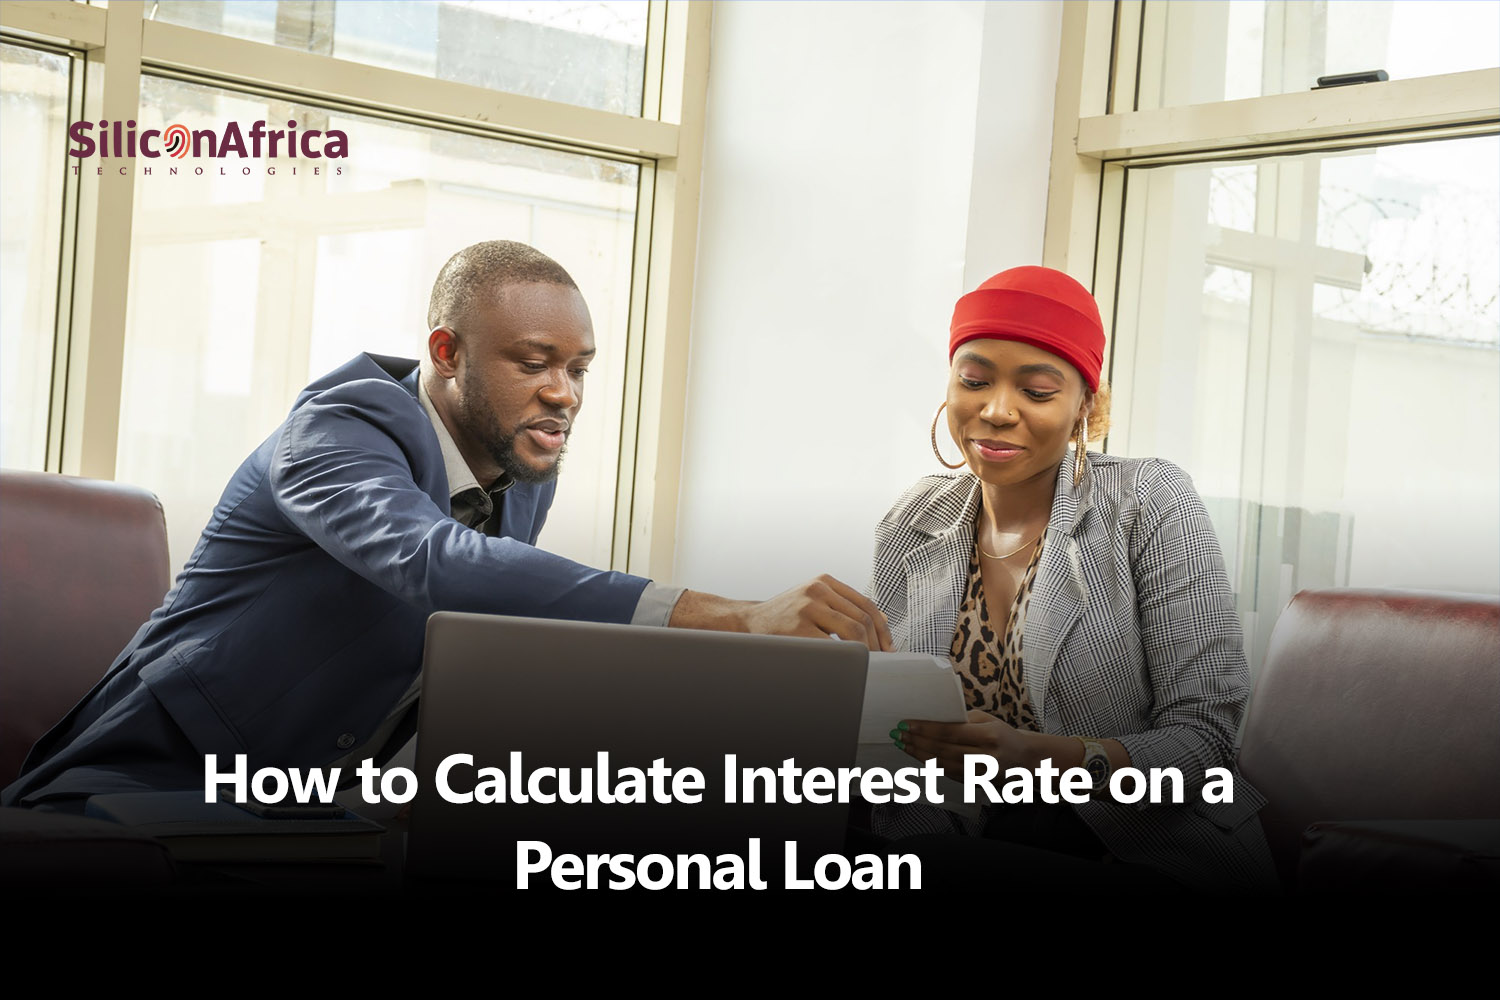 How to Calculate Interest Rate on a Personal Loan